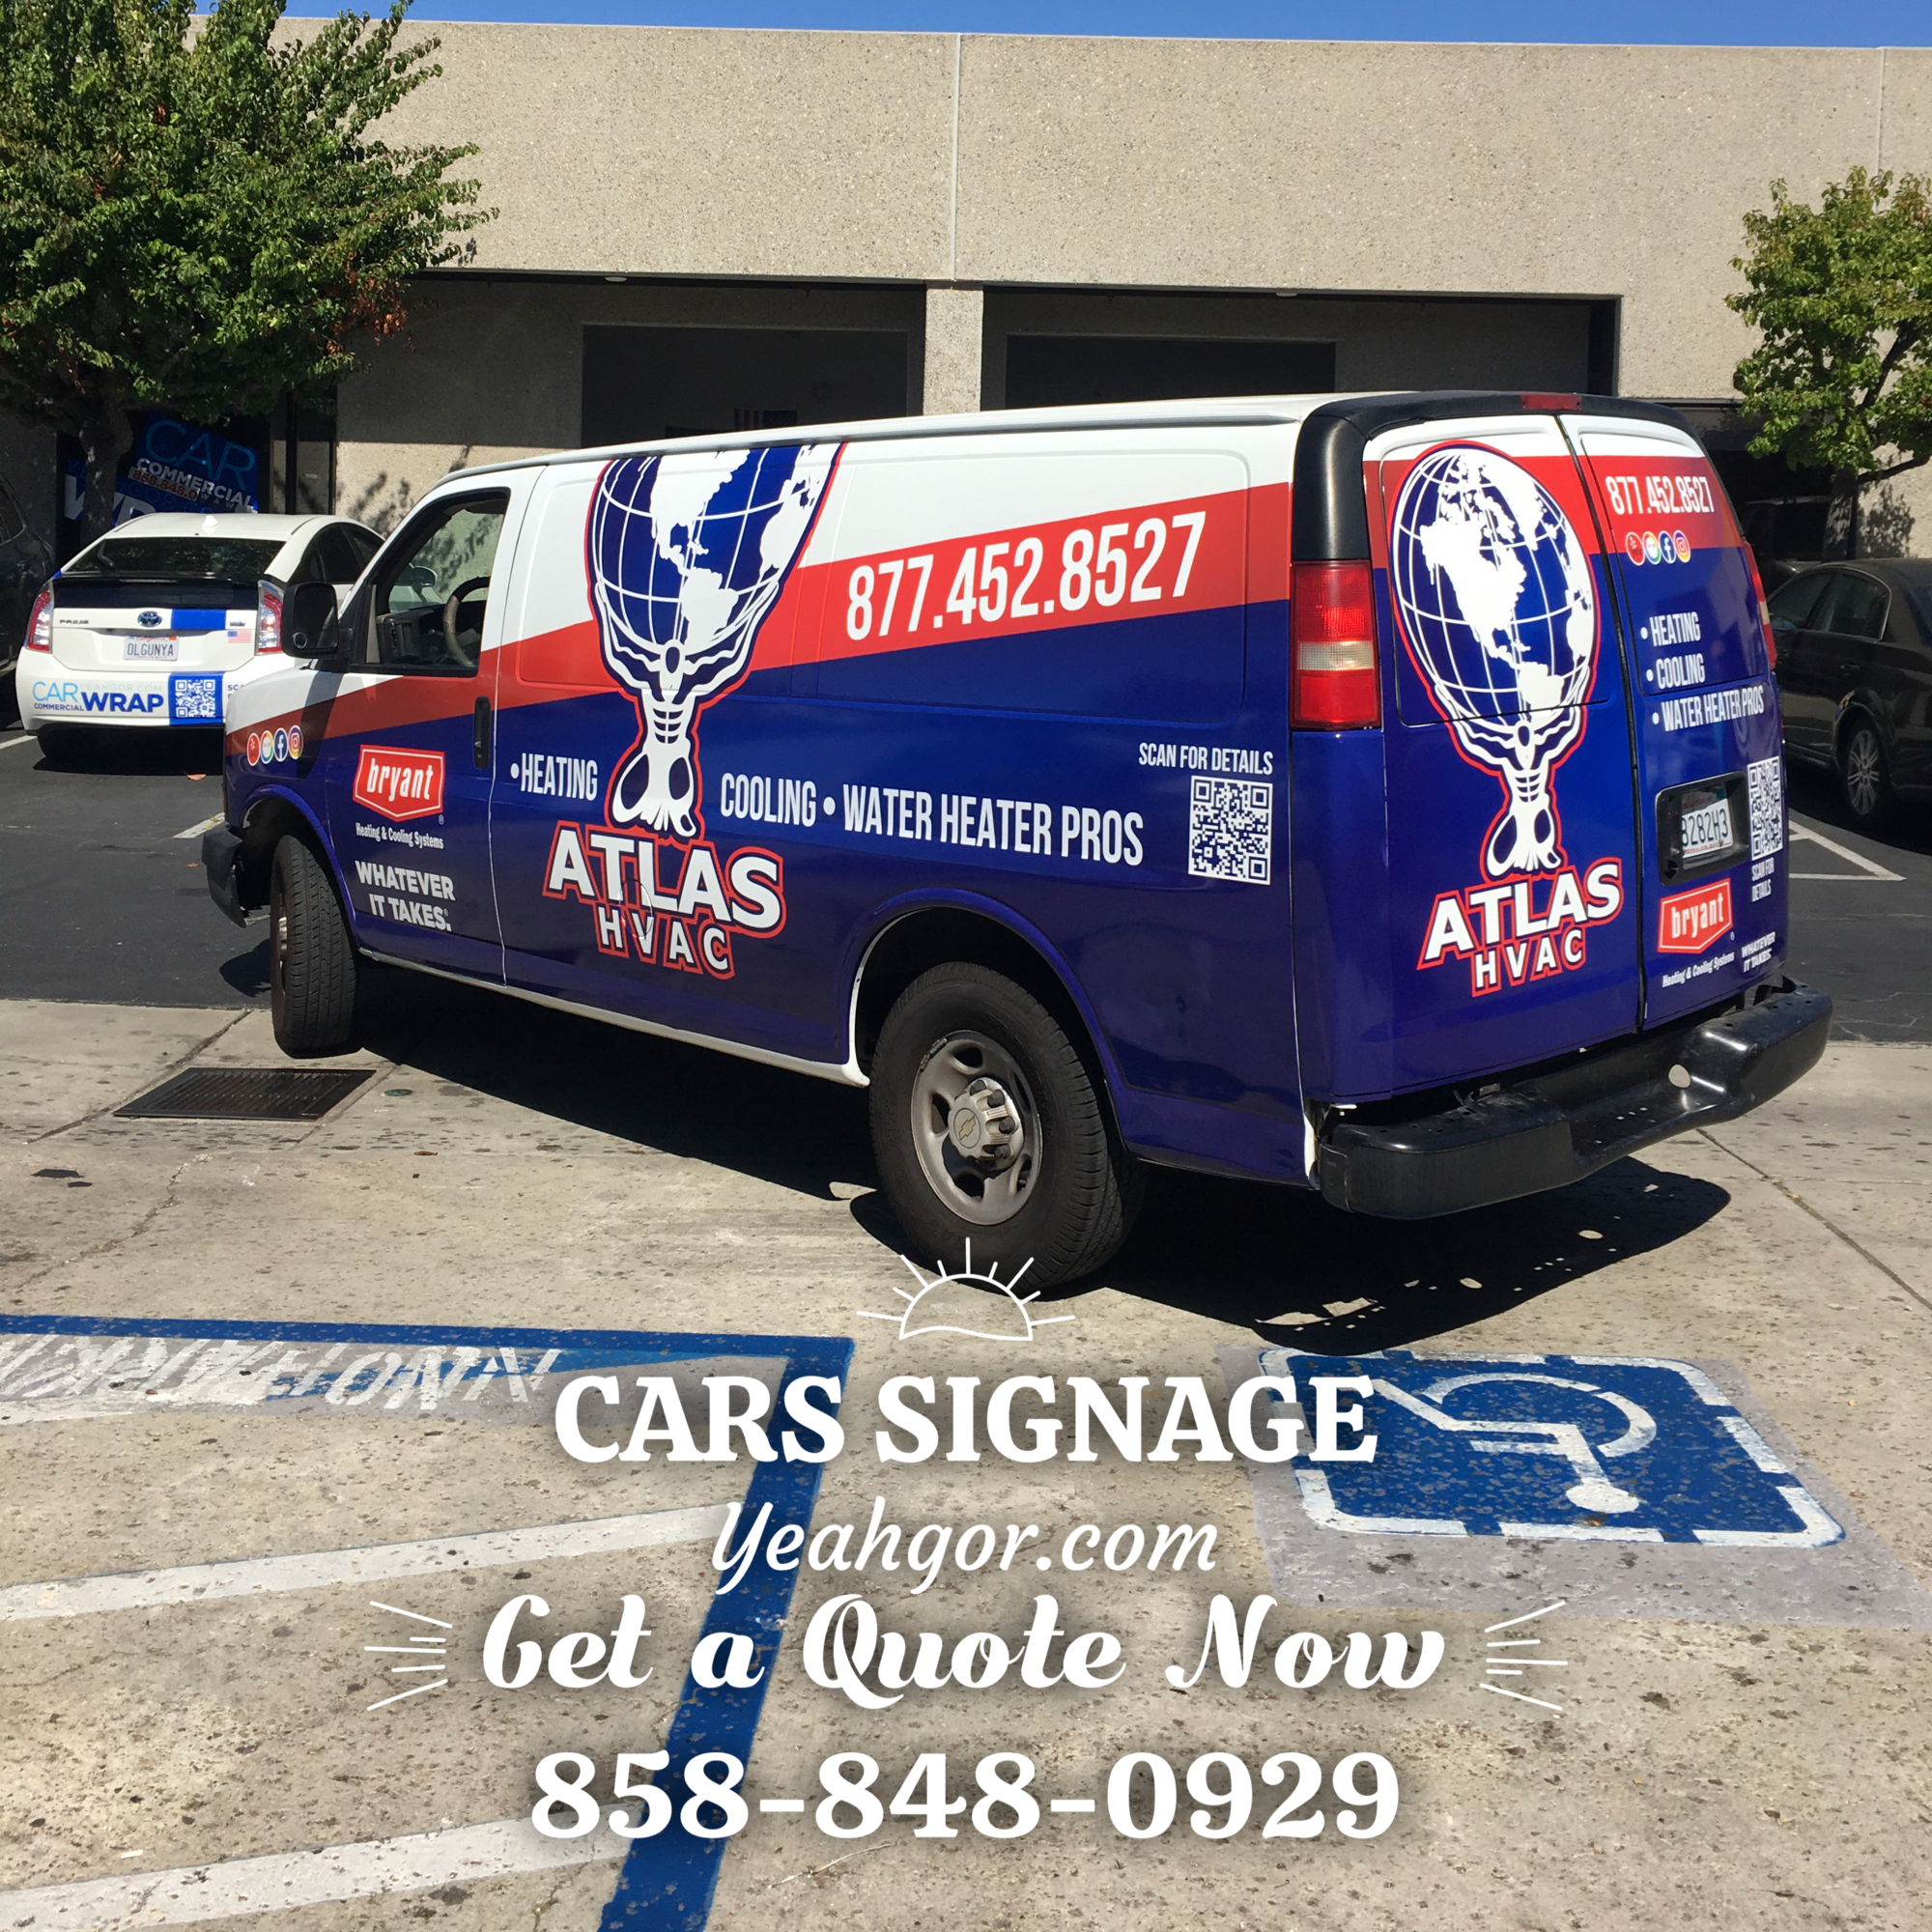 Chula Vista, CA – If you’re looking to take your business to the next level, a commercial wrap can help you do just that.